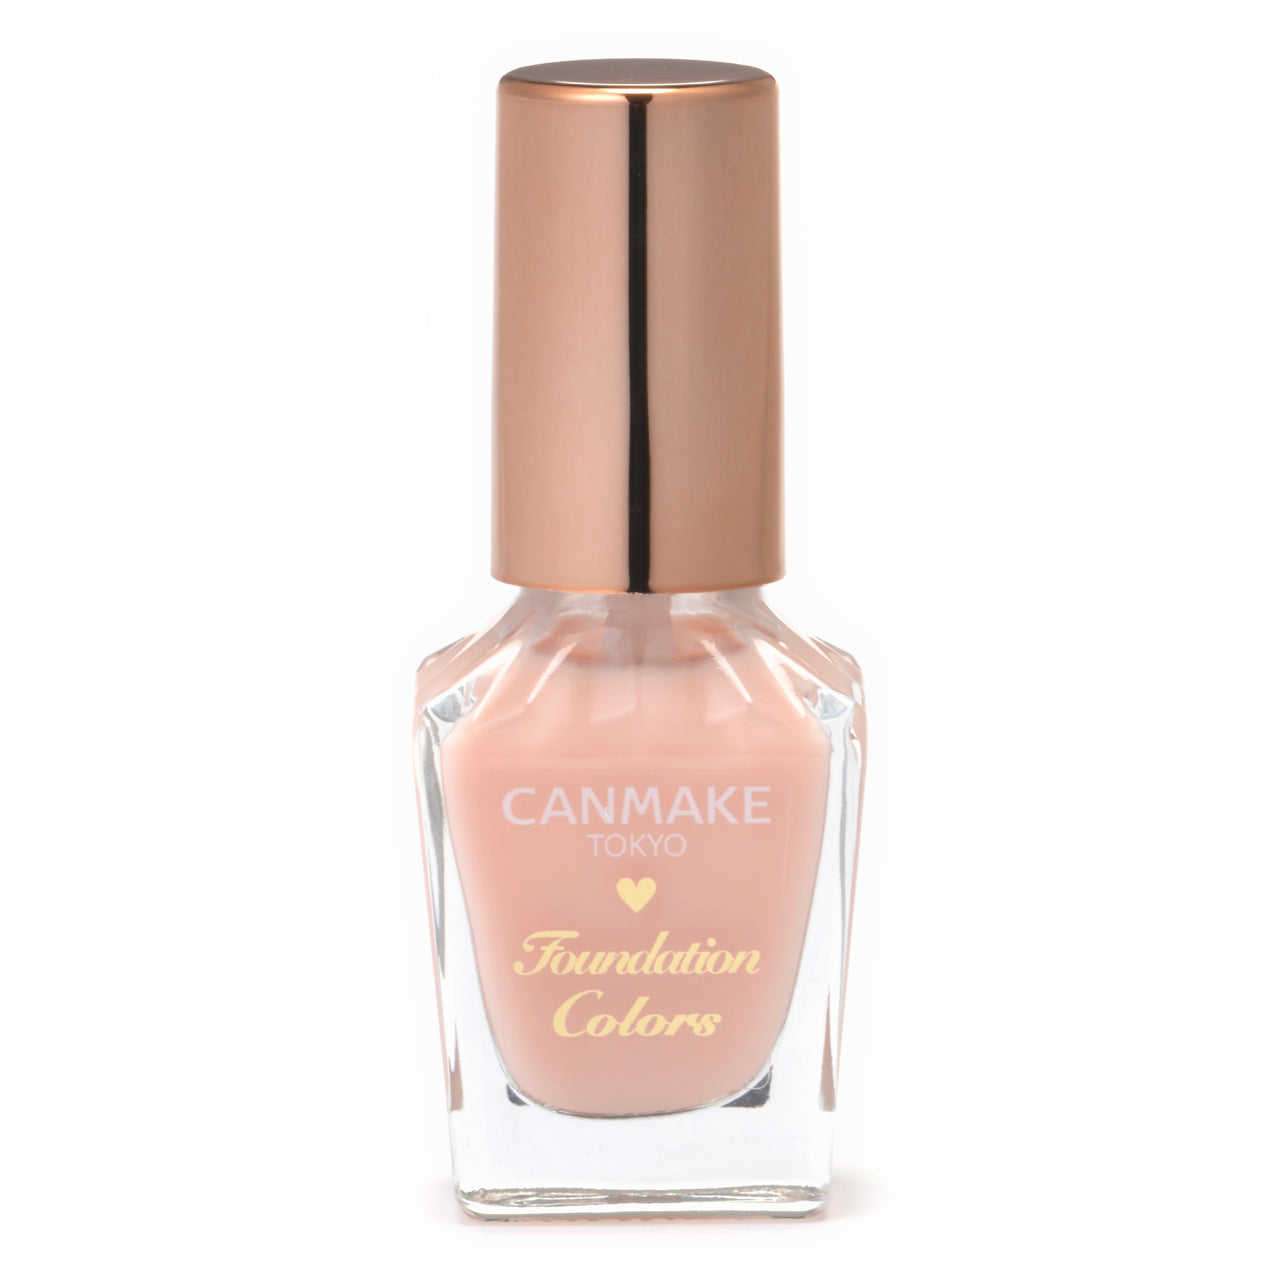 CANMAKE Foundation Colors